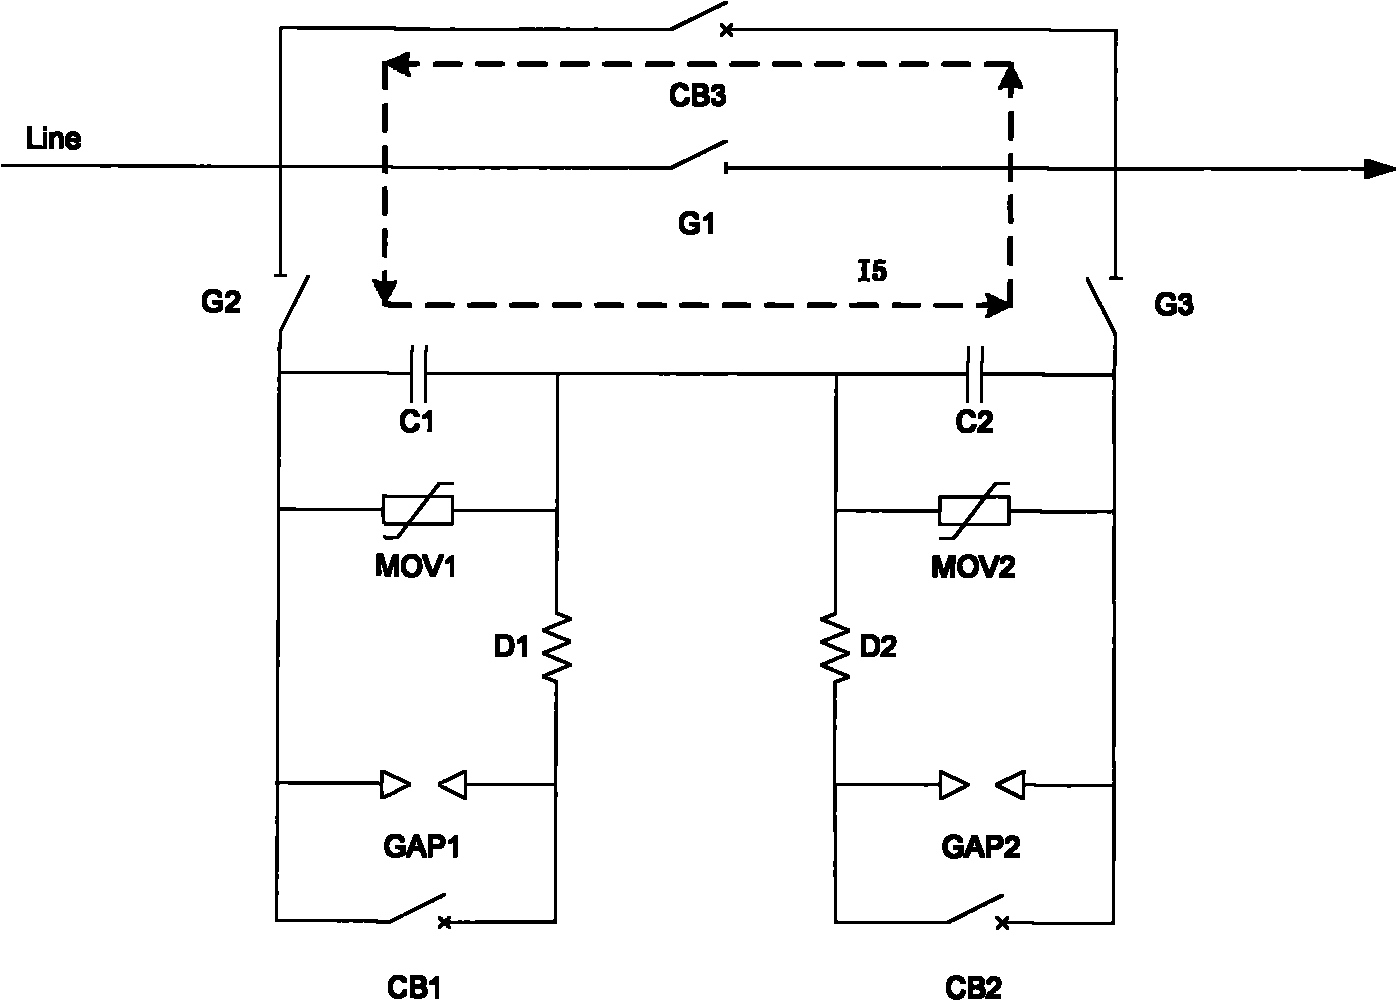 Three-bypass-breaker serial ultra/extra-high voltage subsection series capacitor compensation device